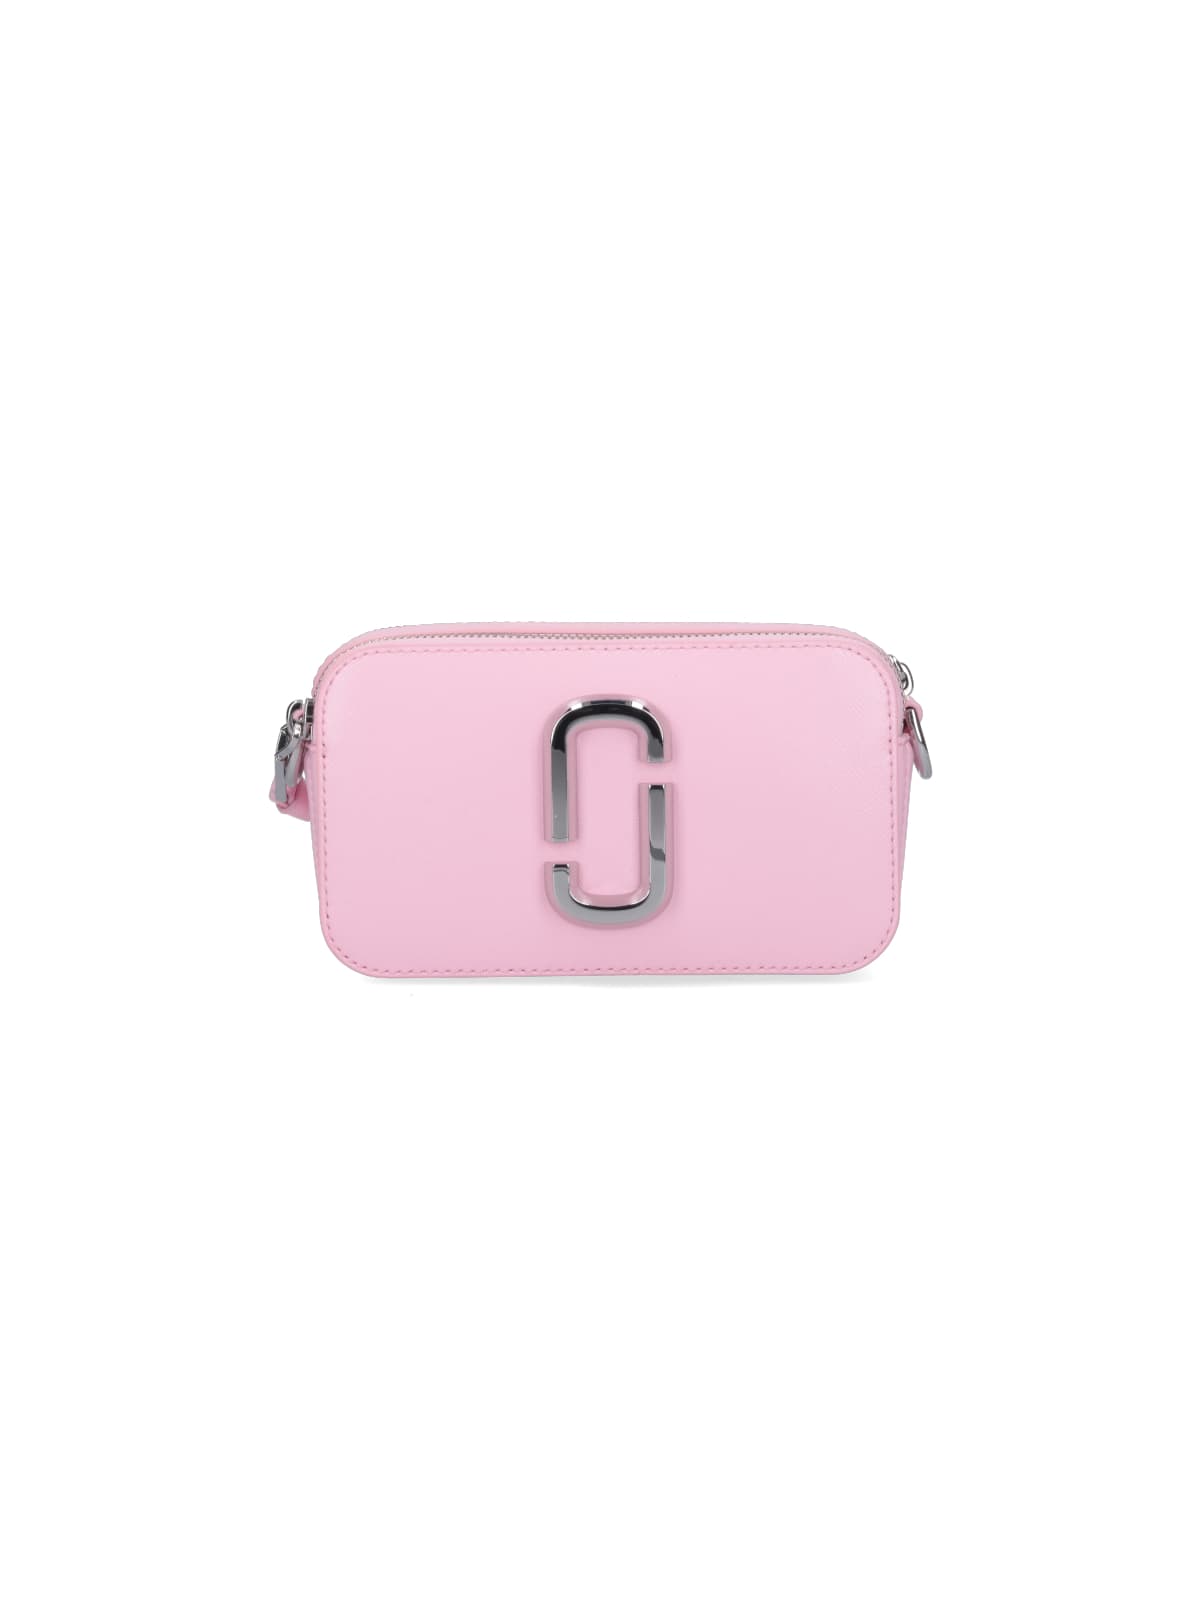 Marc Jacobs The Utility Snapshot Crossbody Bag In Pink